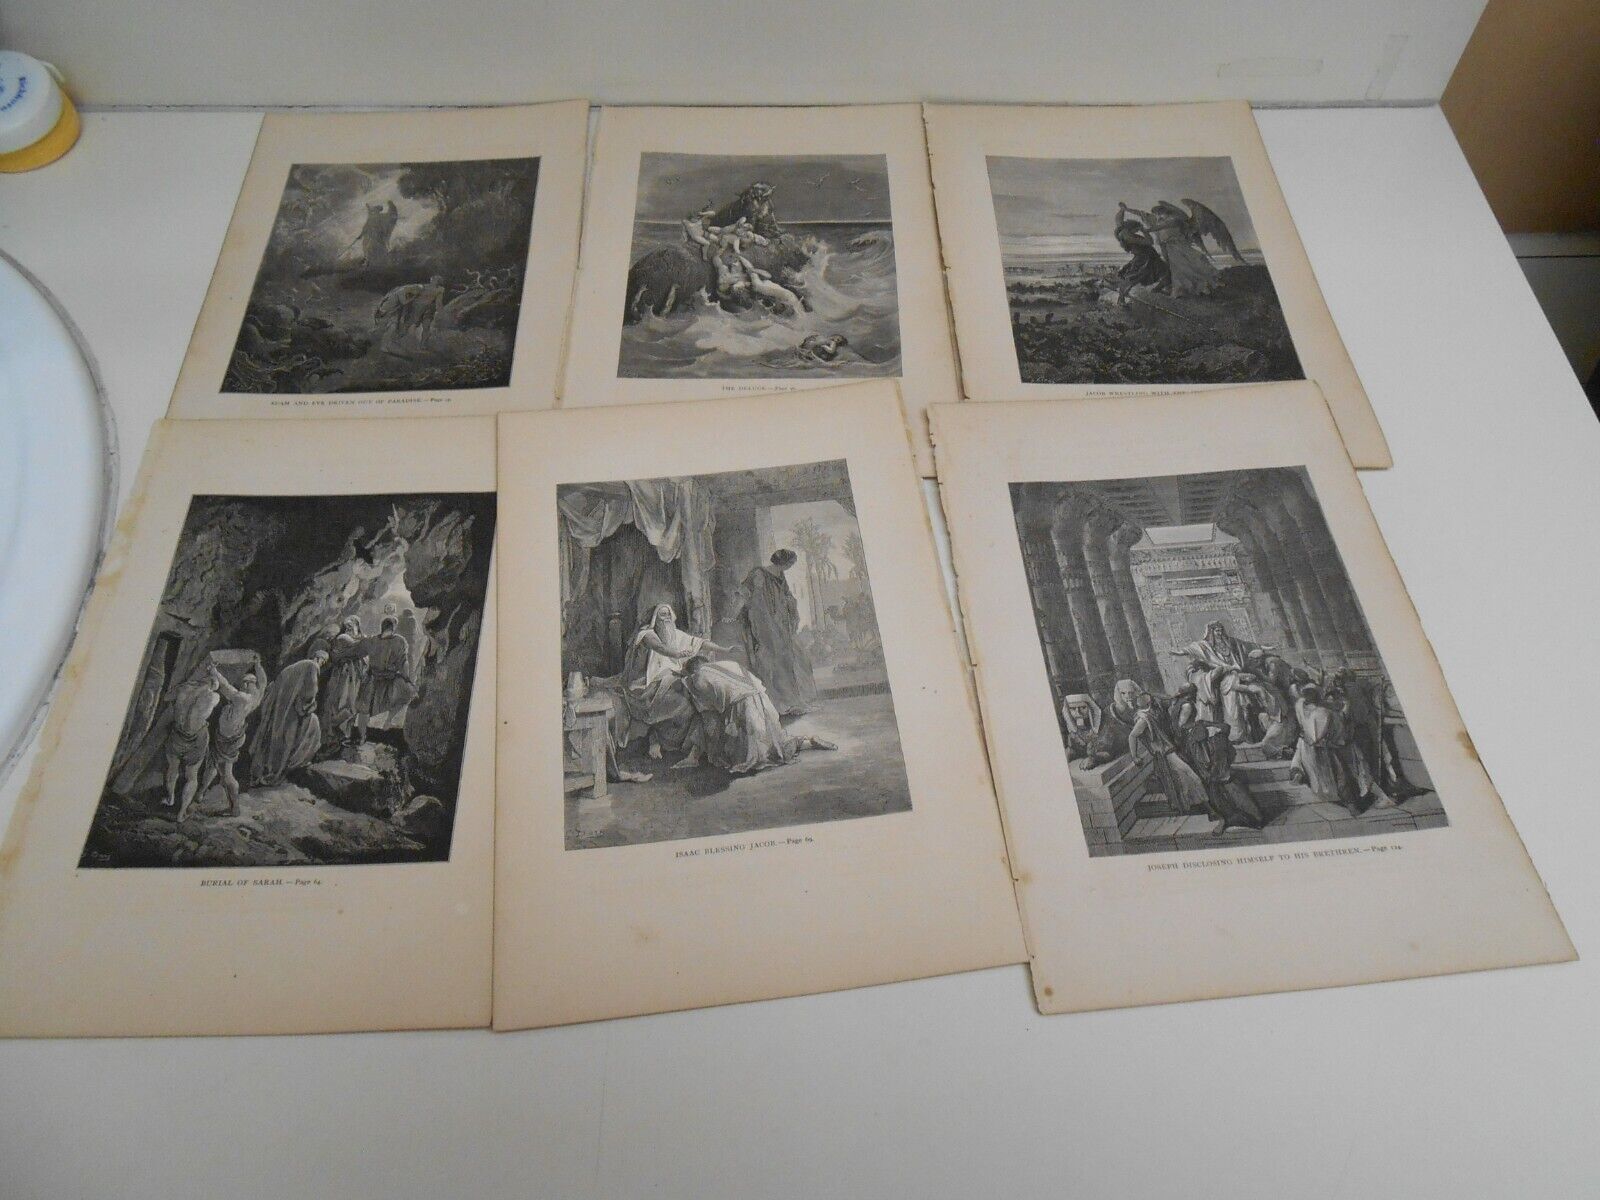 20 1868 Illustrations From Bible By Gustave Dore. Original